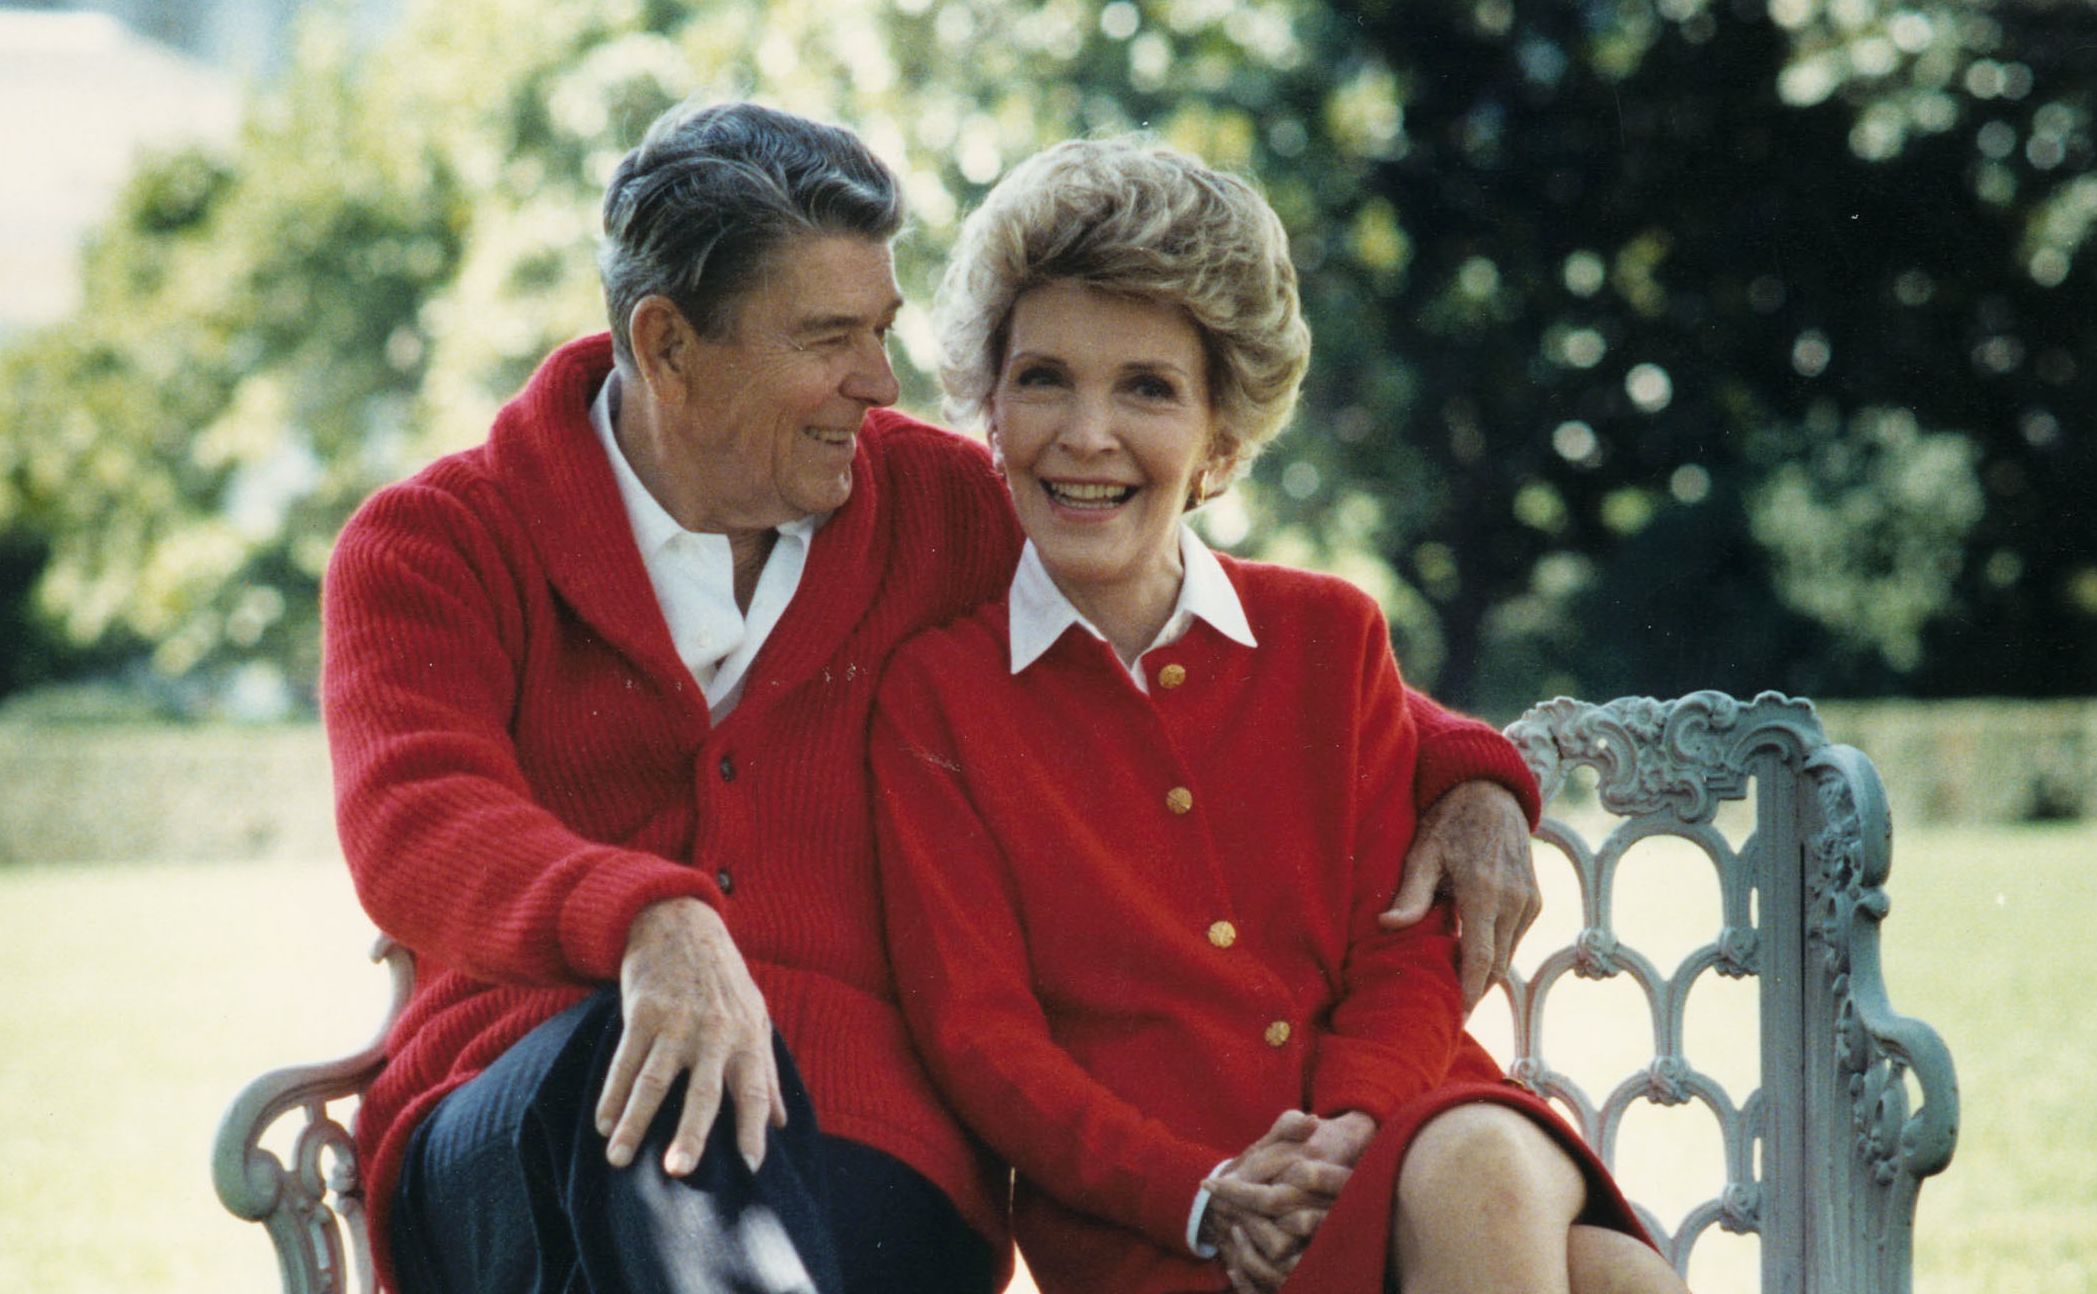 Image courtesy Ronald Reagan Presidental Library/Getty Images